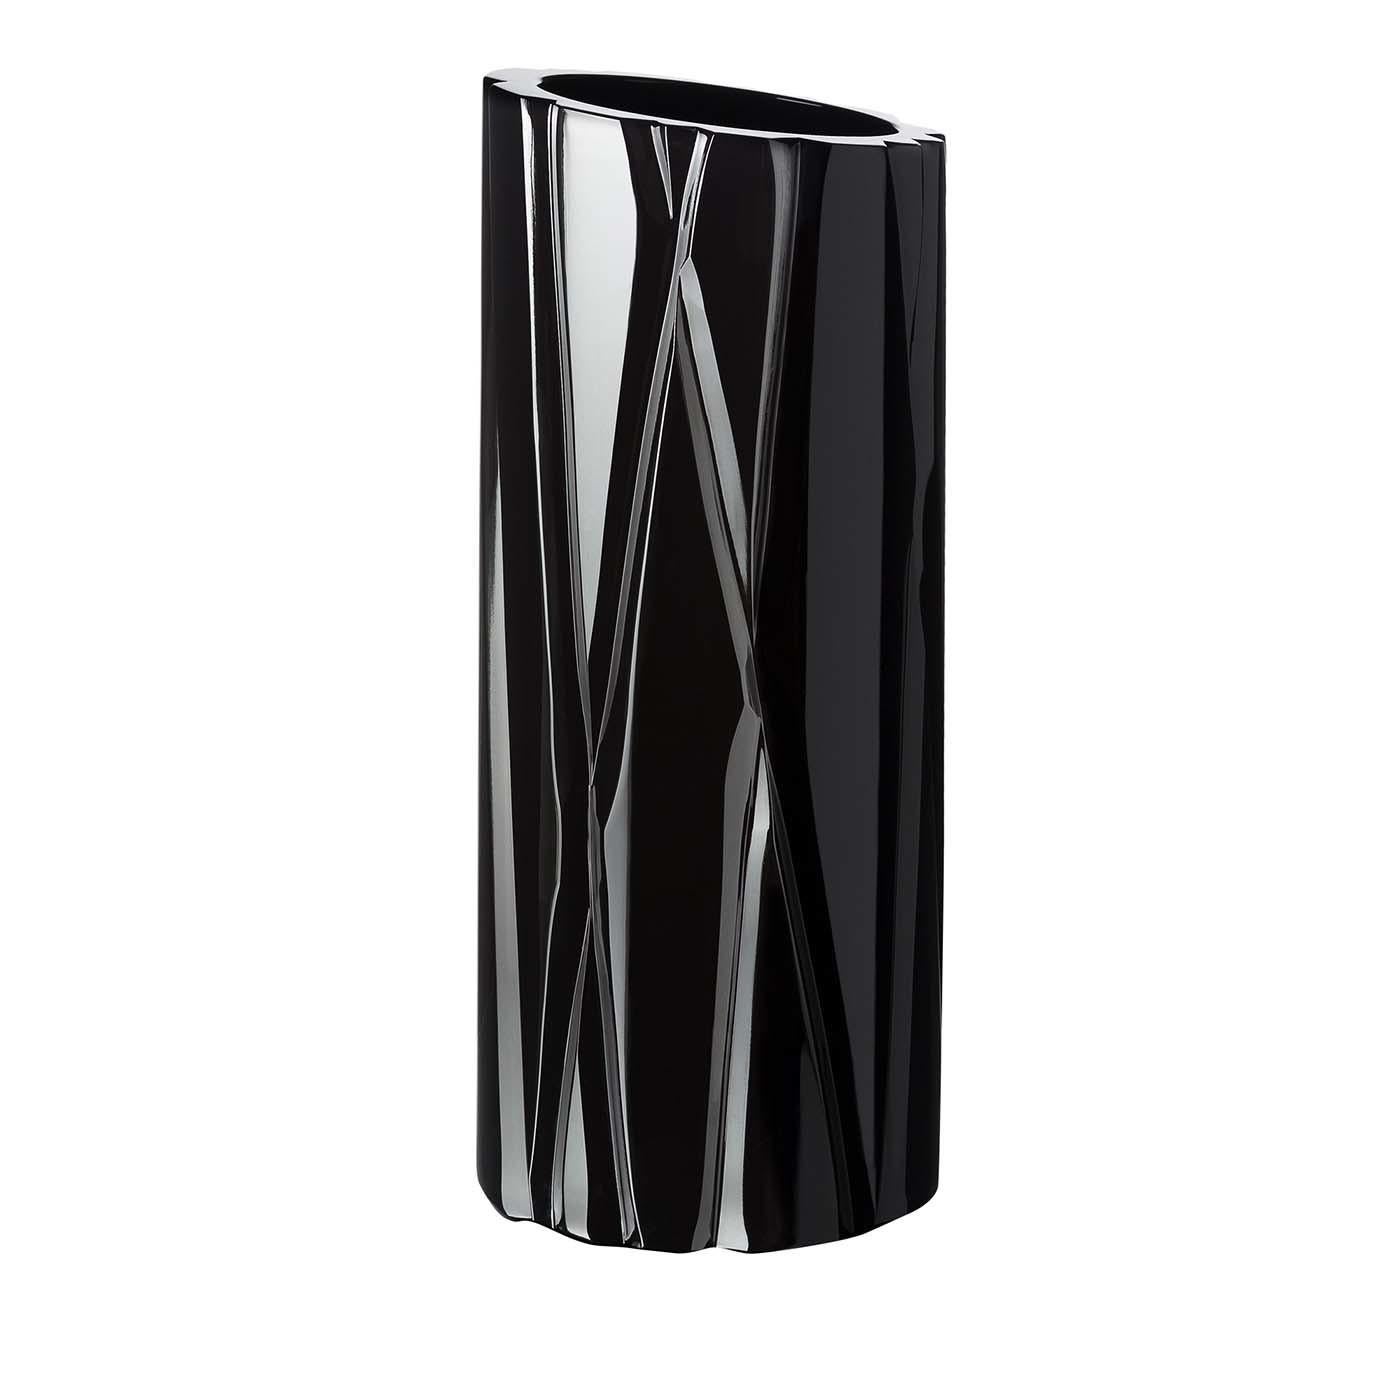 Part of the Skyline collection, this vase is a superb addition to a modern home. It can be displayed with a floral composition or as is, showcasing its elegant cylindrical shape with slight diagonal mouth and stunning texture of crossing lines that